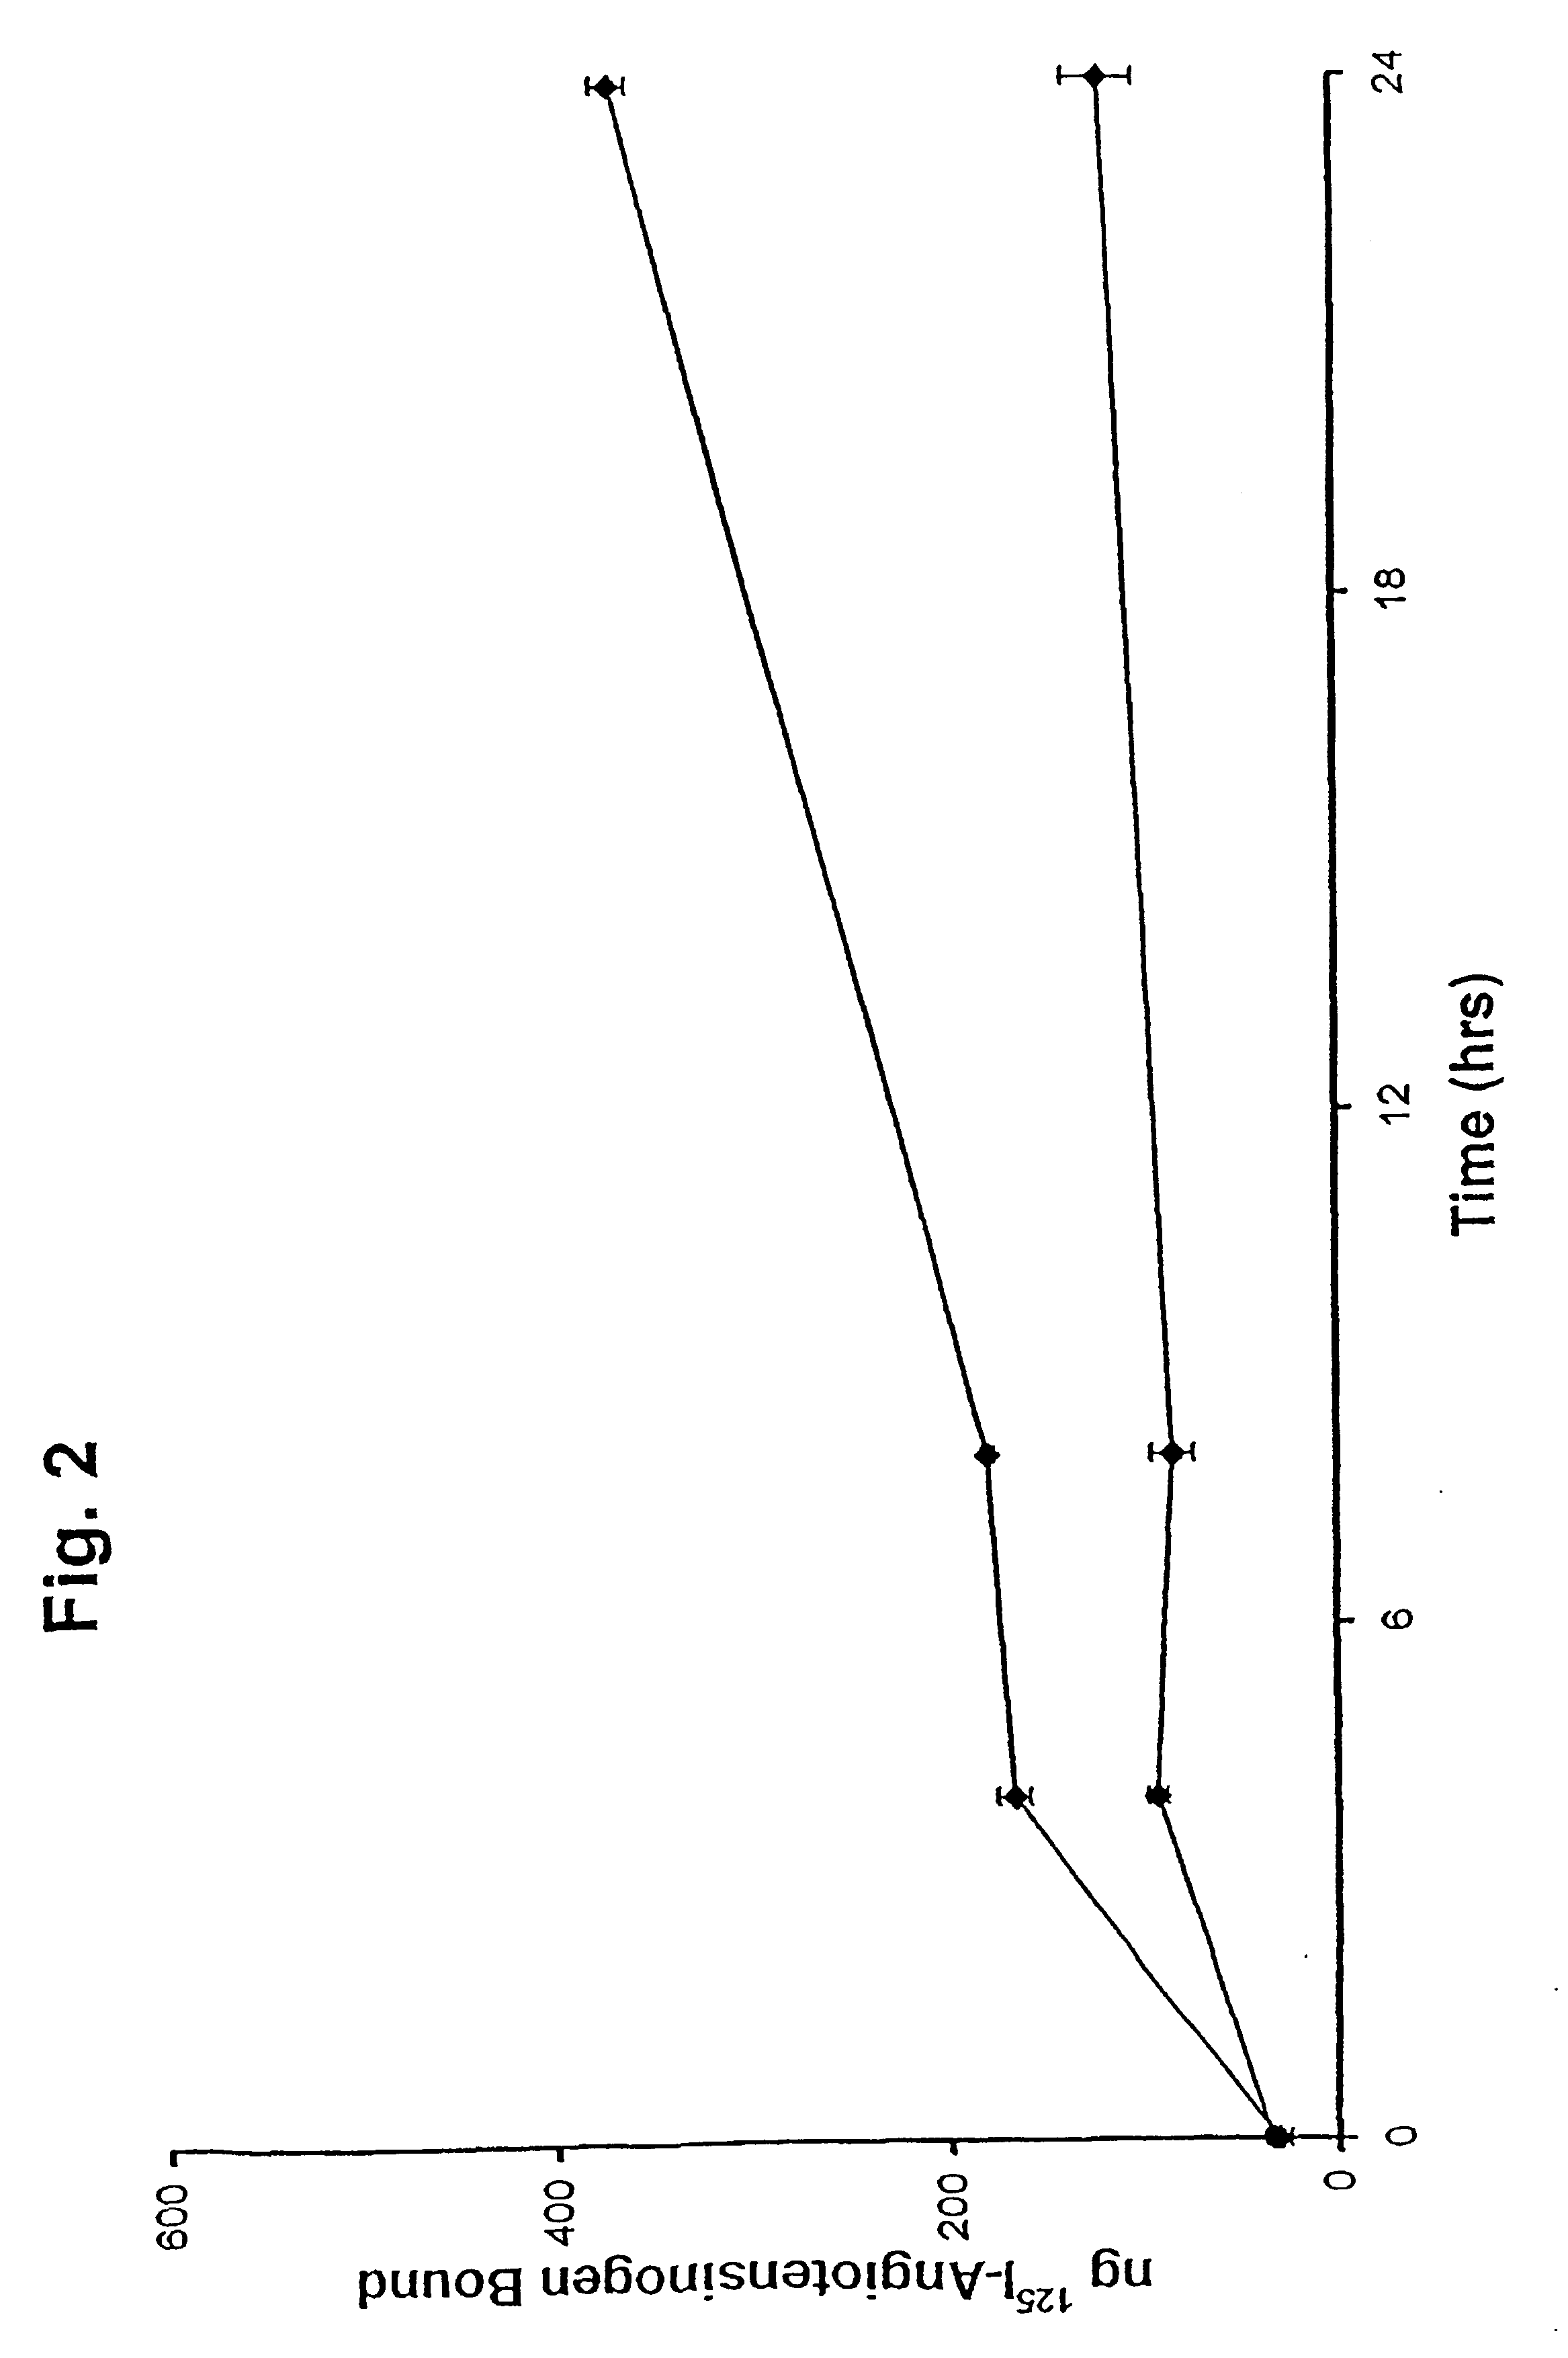 Method of detecting and evaluating angiotensinogen receptor-modulating compounds using placental cells